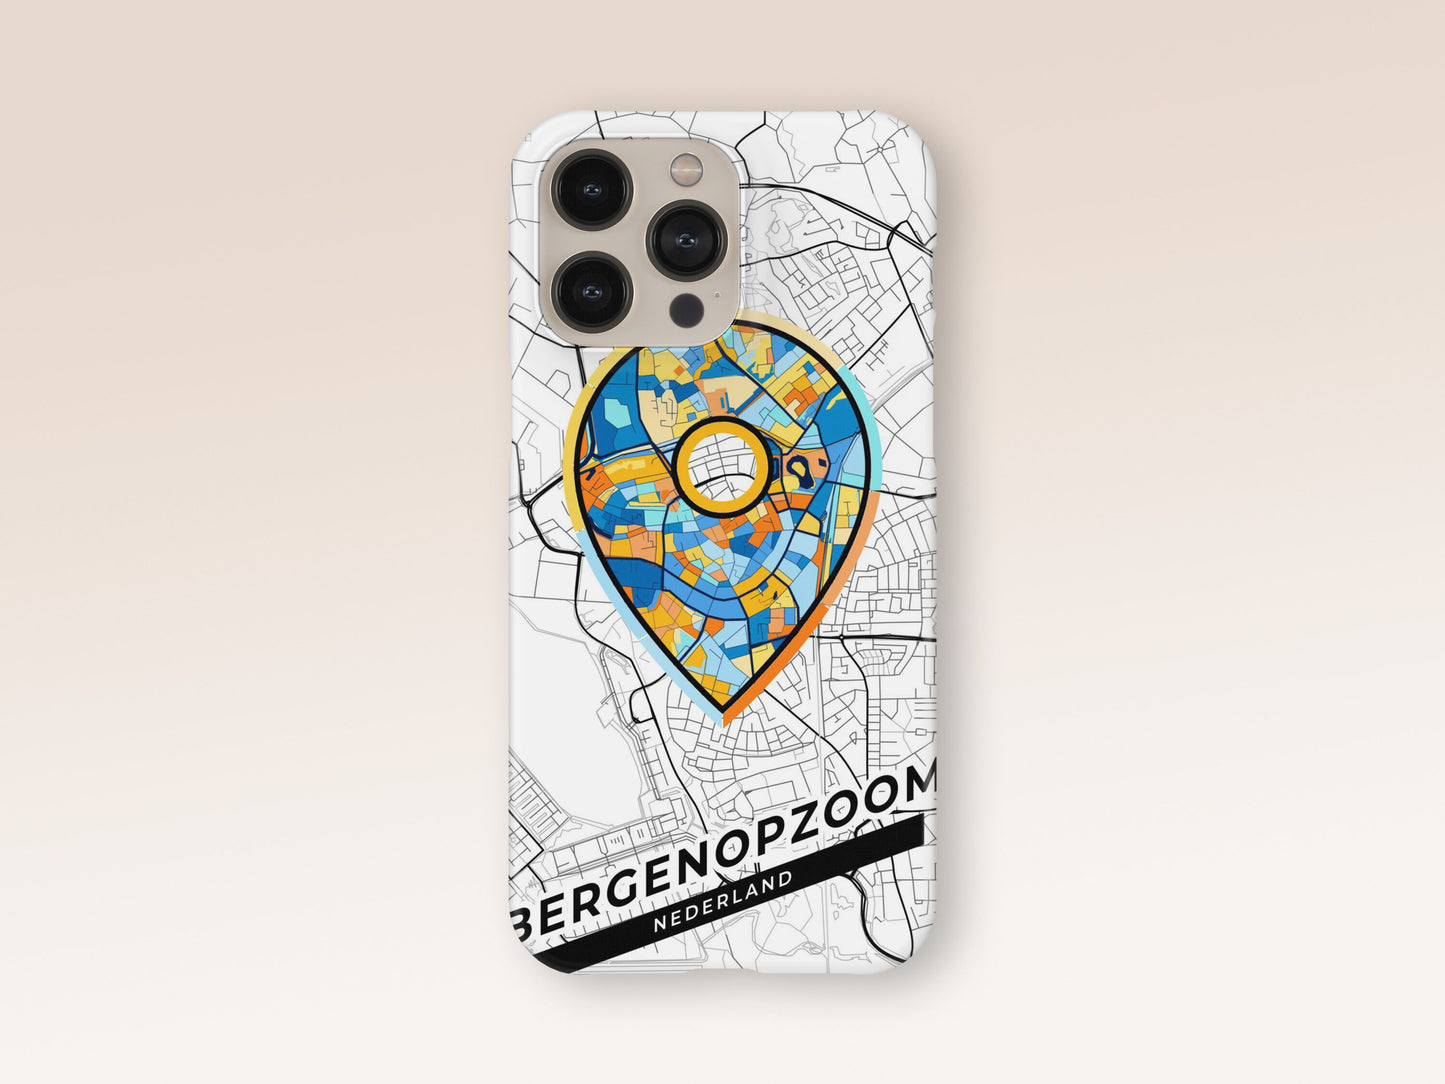 Bergen Op Zoom Netherlands slim phone case with colorful icon. Birthday, wedding or housewarming gift. Couple match cases. 1